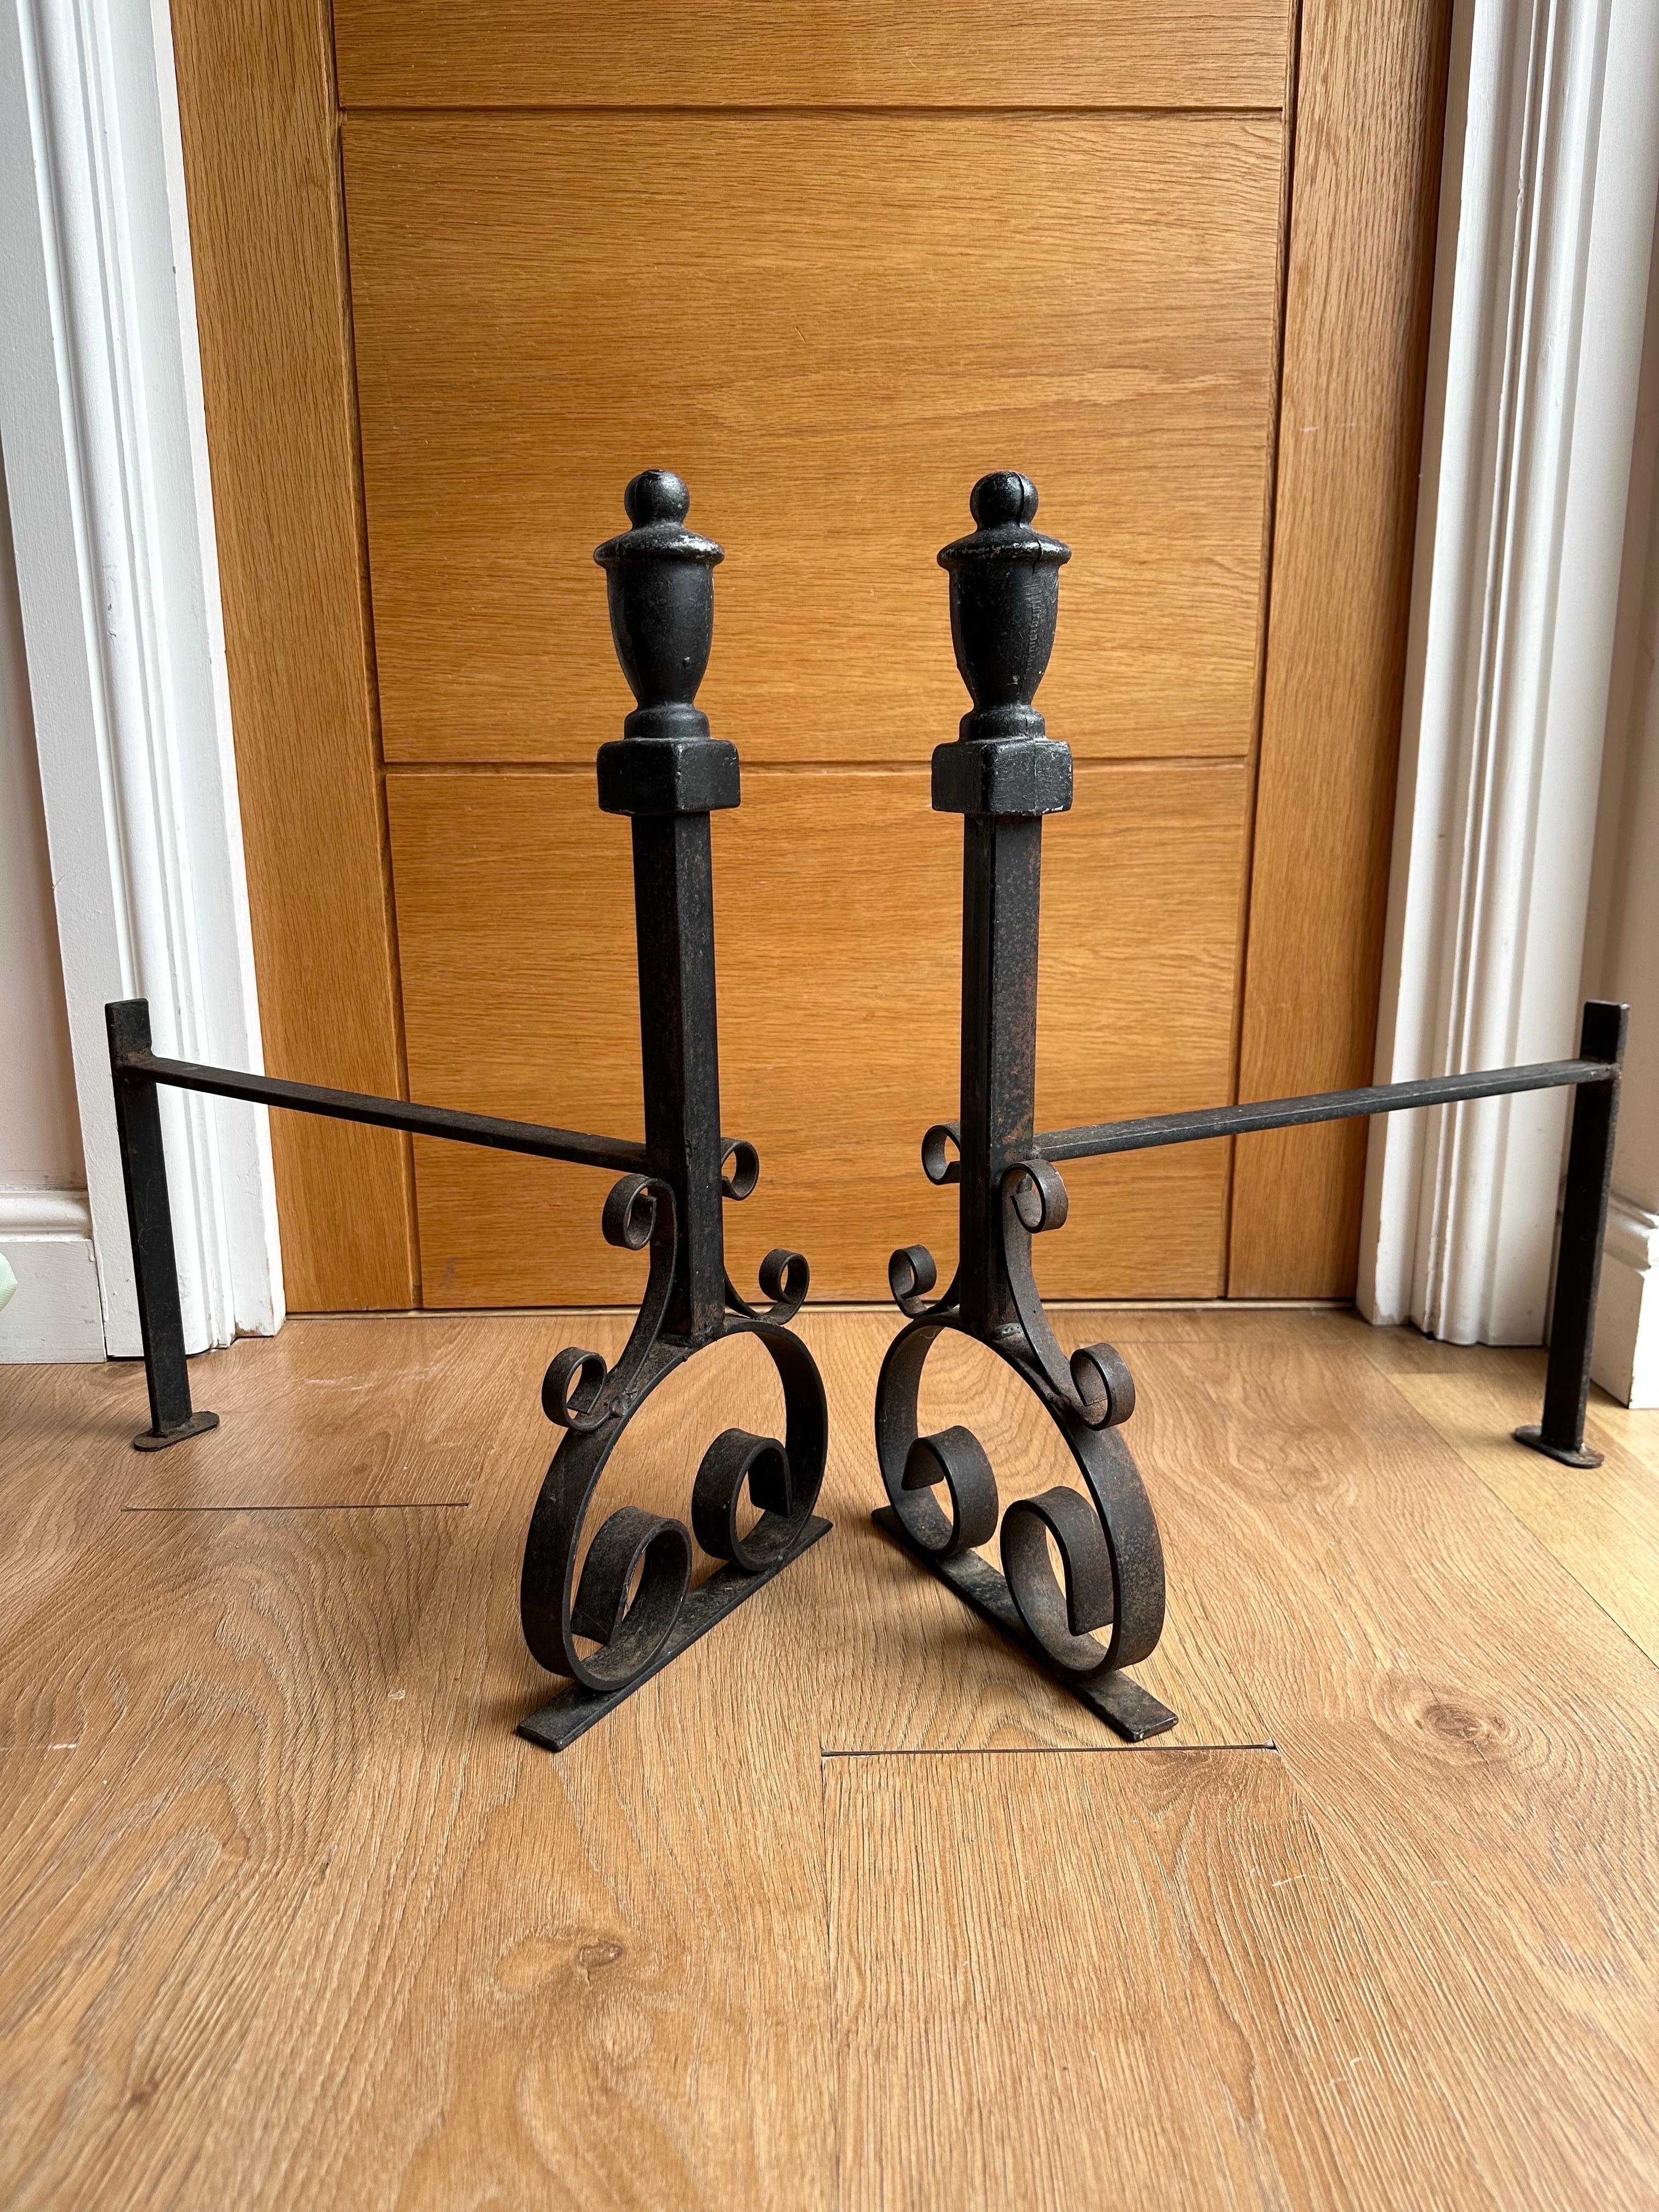 A large pair of 19th century handwrought iron Gothic fireplace andirons firedogs. This pair are completely wrought by hand out of very thick iron and have a dark black finish, crafted with swirled legs and shafts with beautifully wrought floral